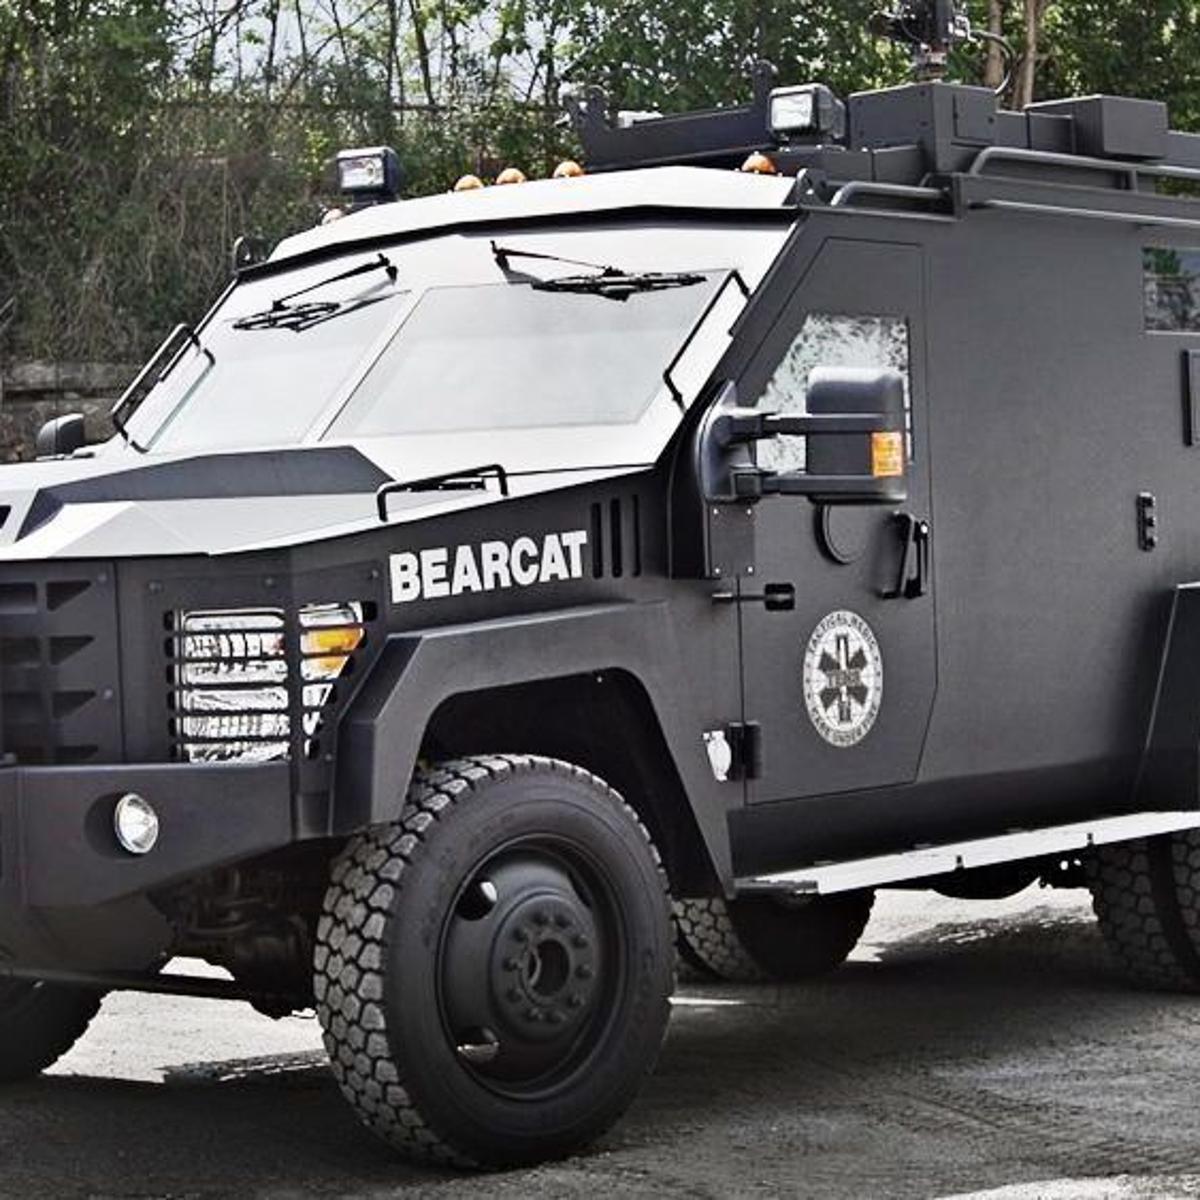 Owasso Swat Team To Add First Armored Vehicle The Bearcat To Its Fleet Latest News Tulsaworld Com